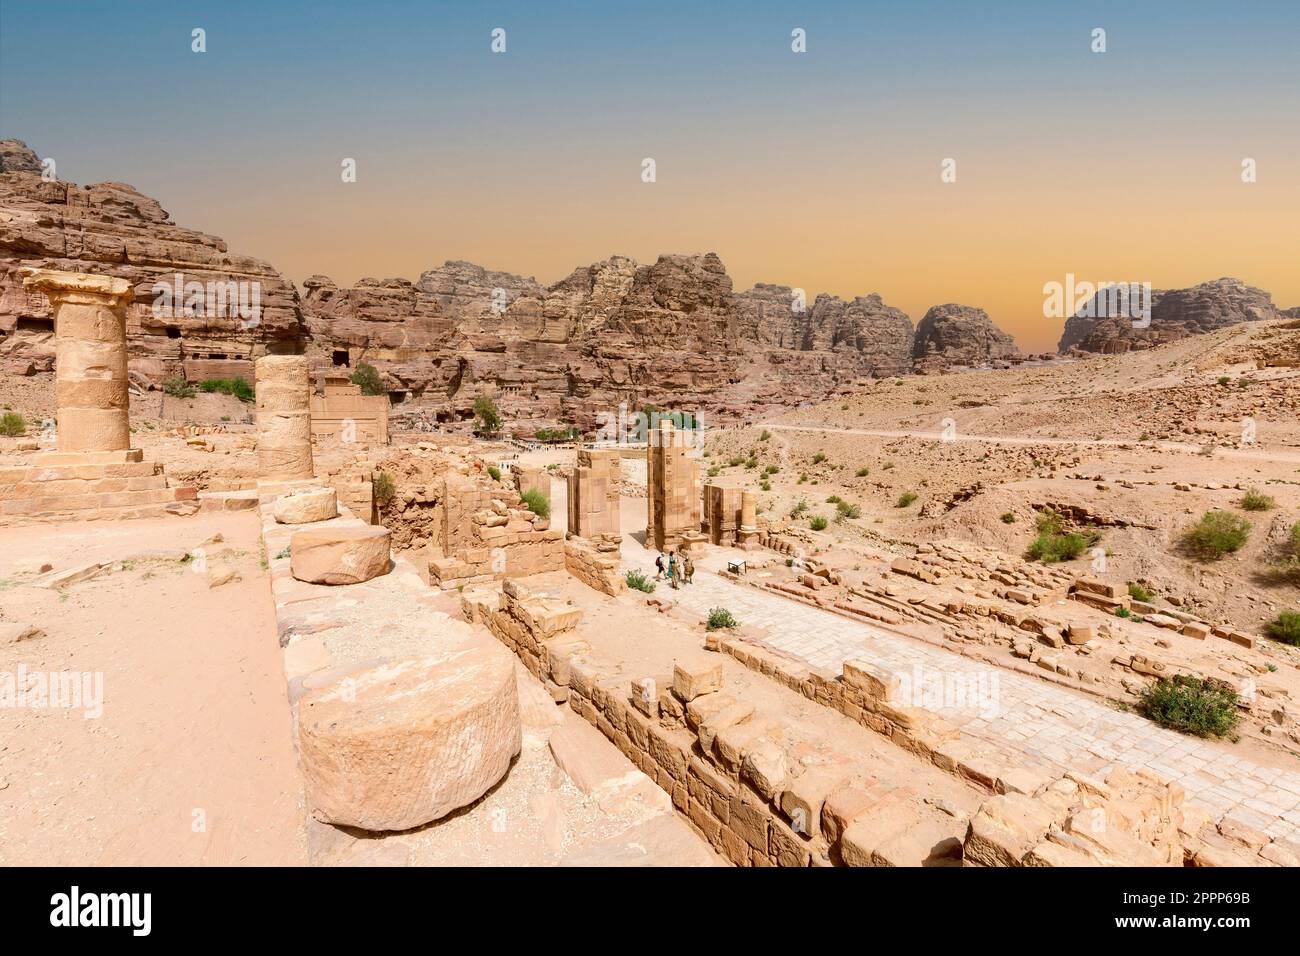 The temenos gate at the end of The Colonnaded Street in the ancient city of Petra, Jordan. Stock Photo